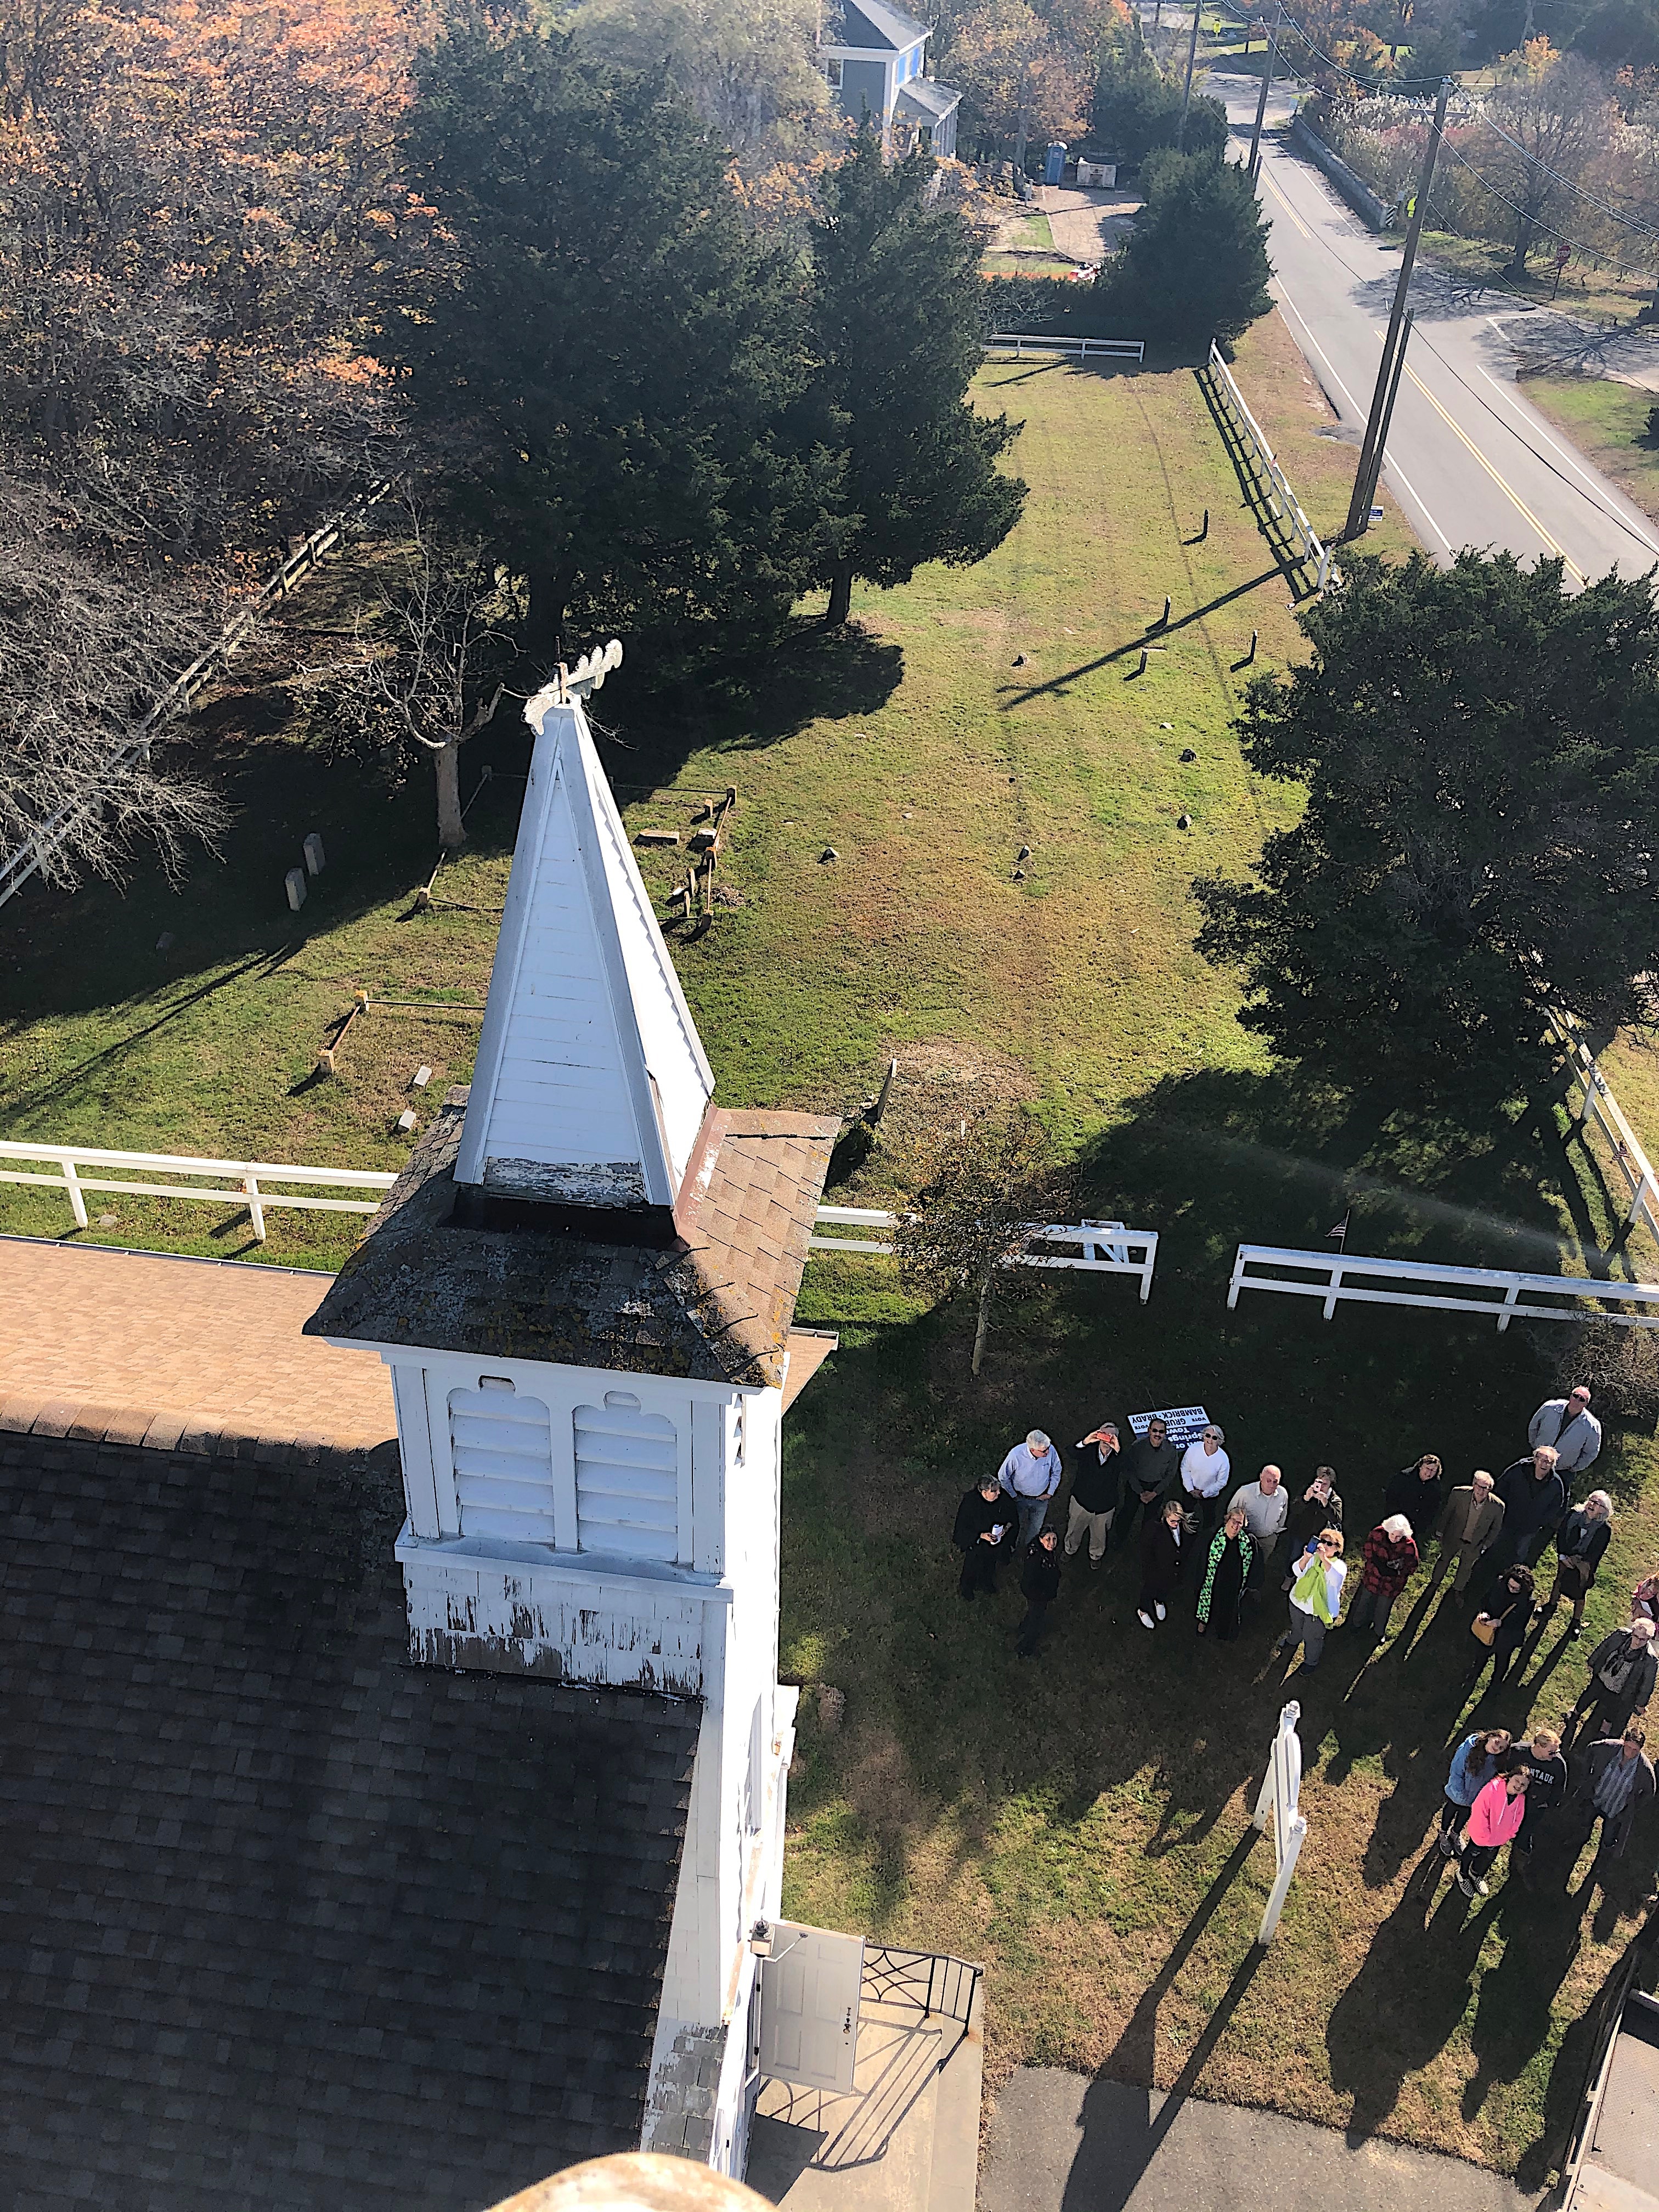 With assistance from Don Chambers of Timberworks who brought his cherry-picker, Ricky Muller removed the 137-year-old wooden windvane from the steeple of Springs Community Presbyterian Church on Sunday morning. A new windvane will be installed. KYRIL BROMLEY 